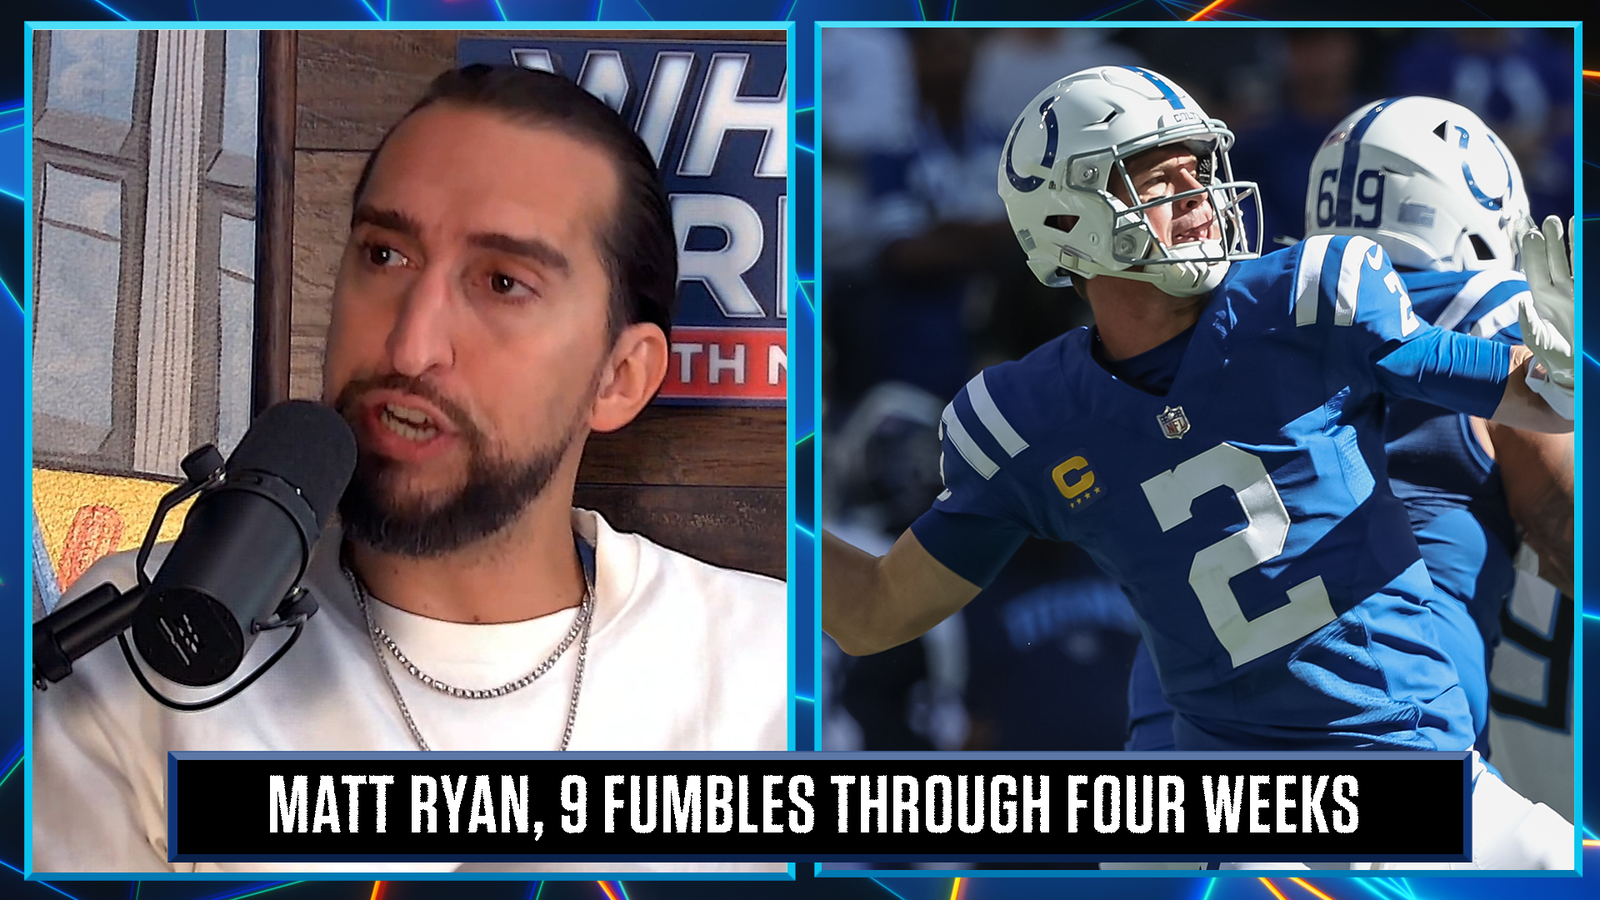 Nick Wright was too high on "aging" Matt Ryan and the Colts. Nick defends his take and pleads ignorance. 